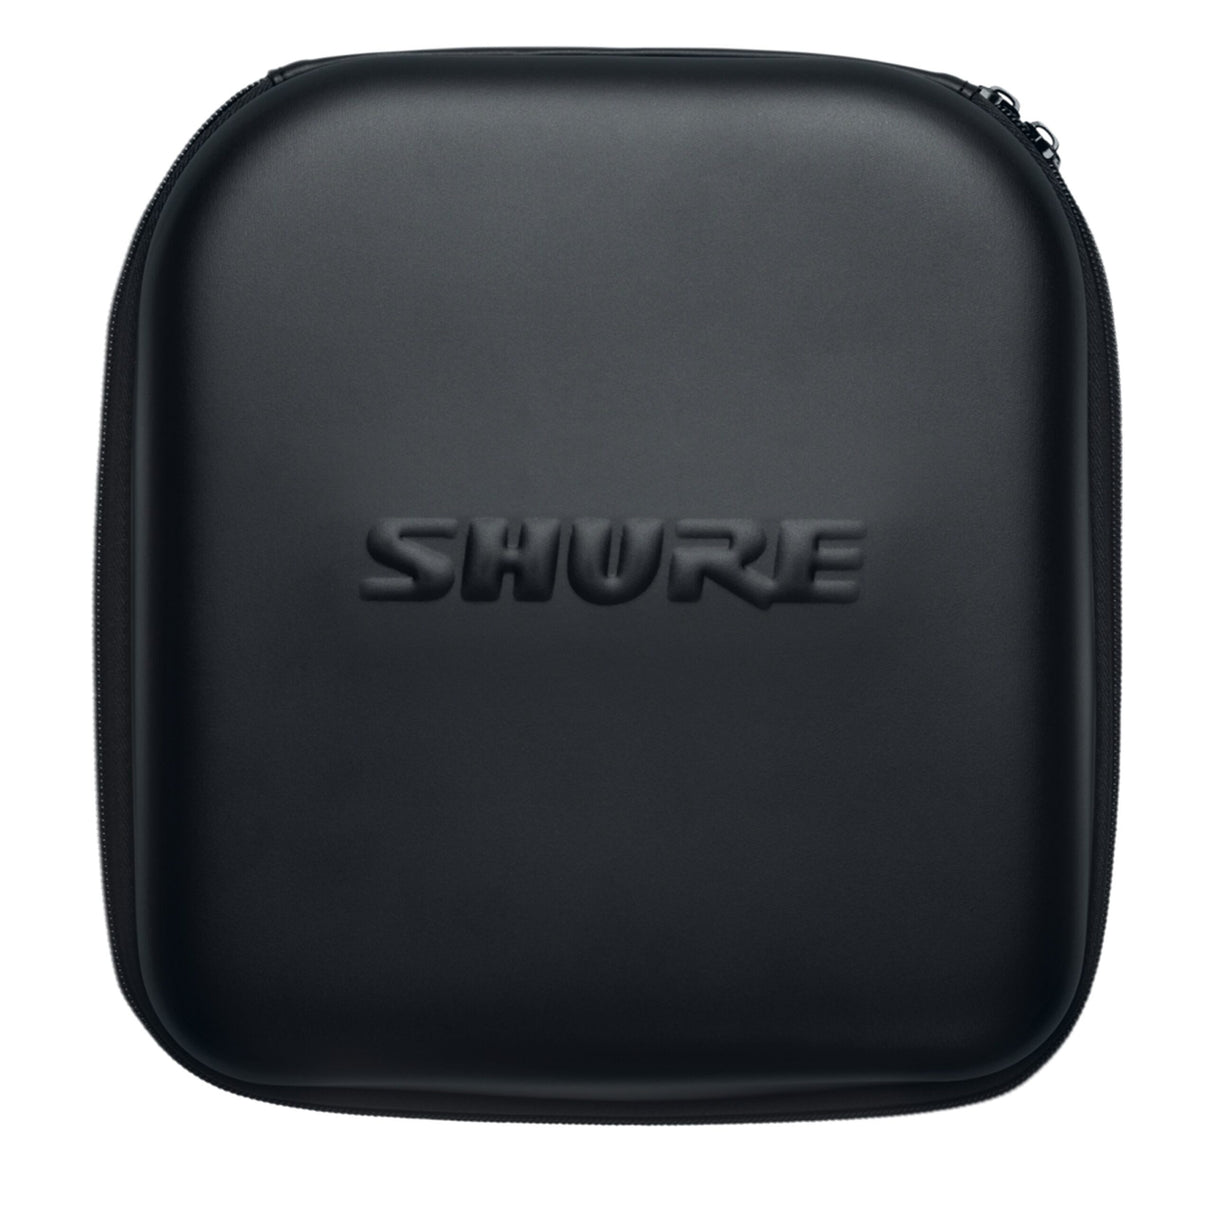 Shure HPACC2 Carrying Case for SRH1440 and SRH1840